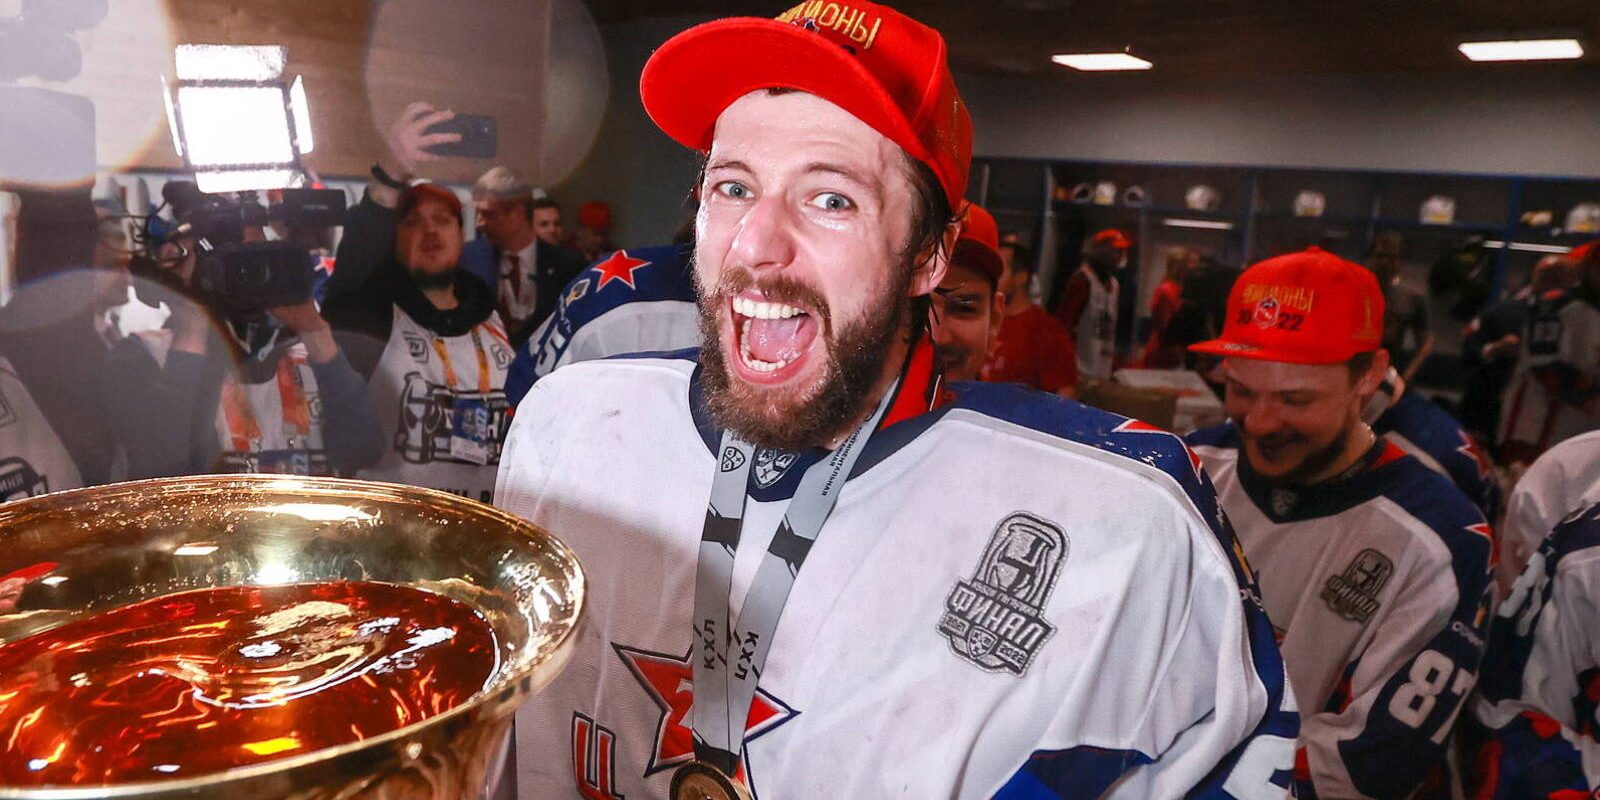 MAGNITOGORSK, CHELYABINSK REGION, RUSSIA - APRIL 30, 2022: HC CSKA Moscow's goaltender Ivan Fedotov drinks champagne from a trophy in a locker room after winning Leg 7 of their 2021/22 Kontinental Hockey League Gagarin Cup Final tie (final best-of-seven series of annual KHL playoffs) against HC Metallurg Magnitogorsk at the Metallurg Arena. Sergei Fadeichev/TASS/Sipa USA